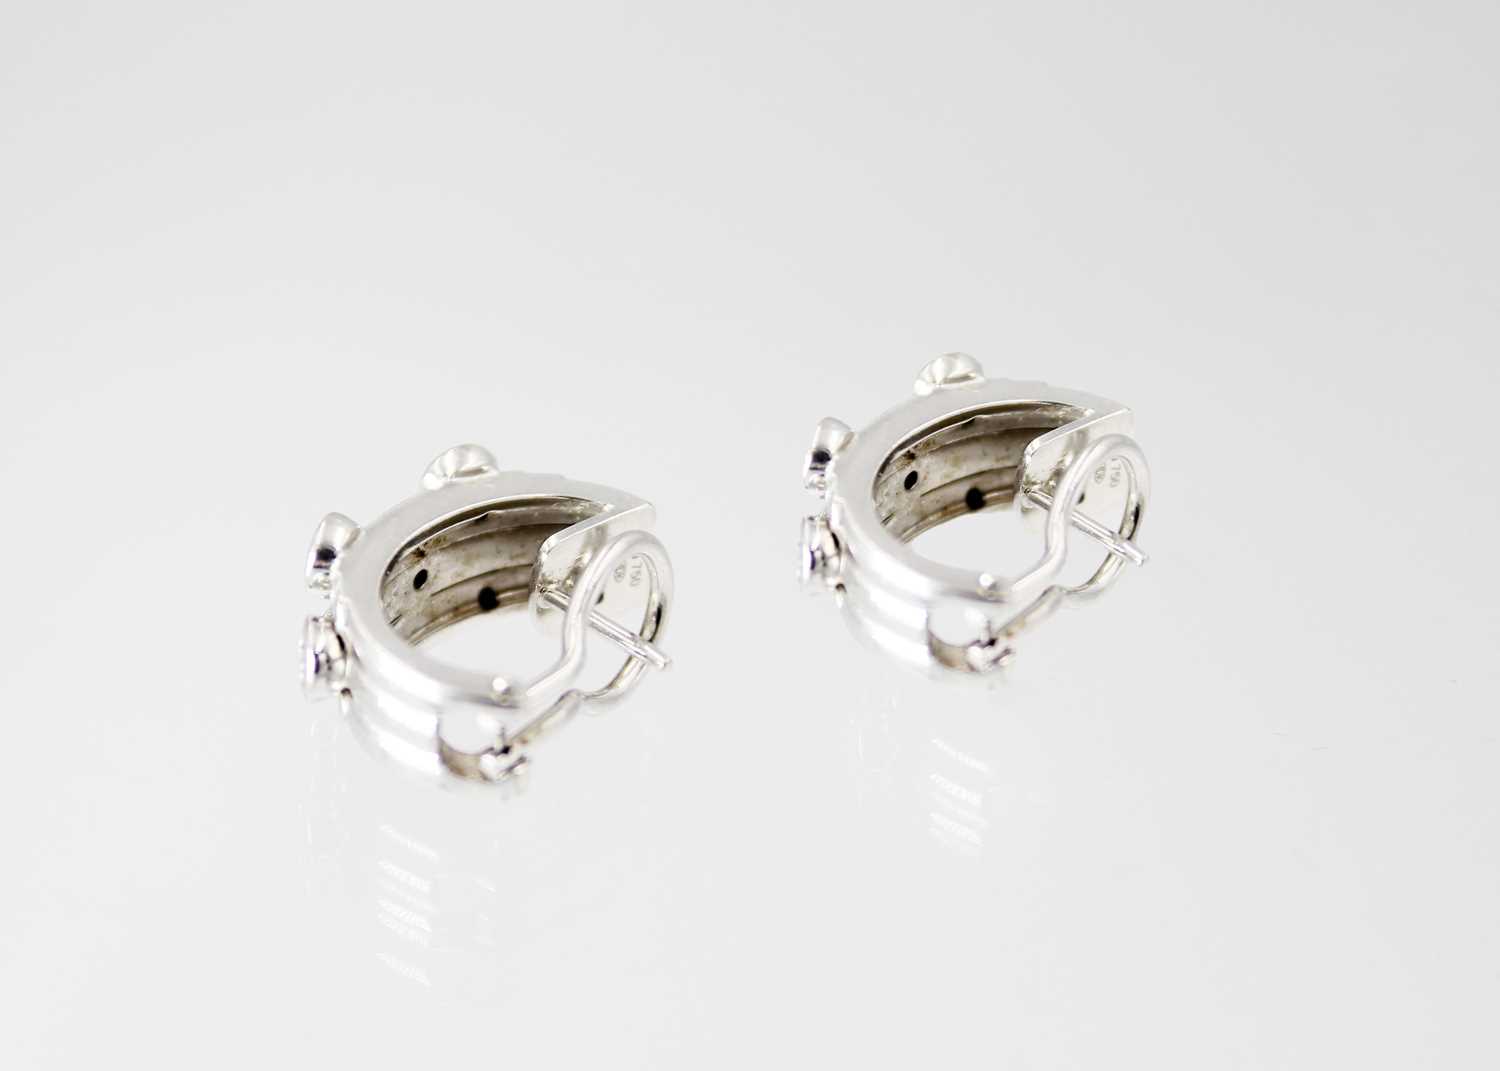 Hans D. Krieger - A stunning pair of 18ct white gold diamond set earrings. - Image 2 of 3